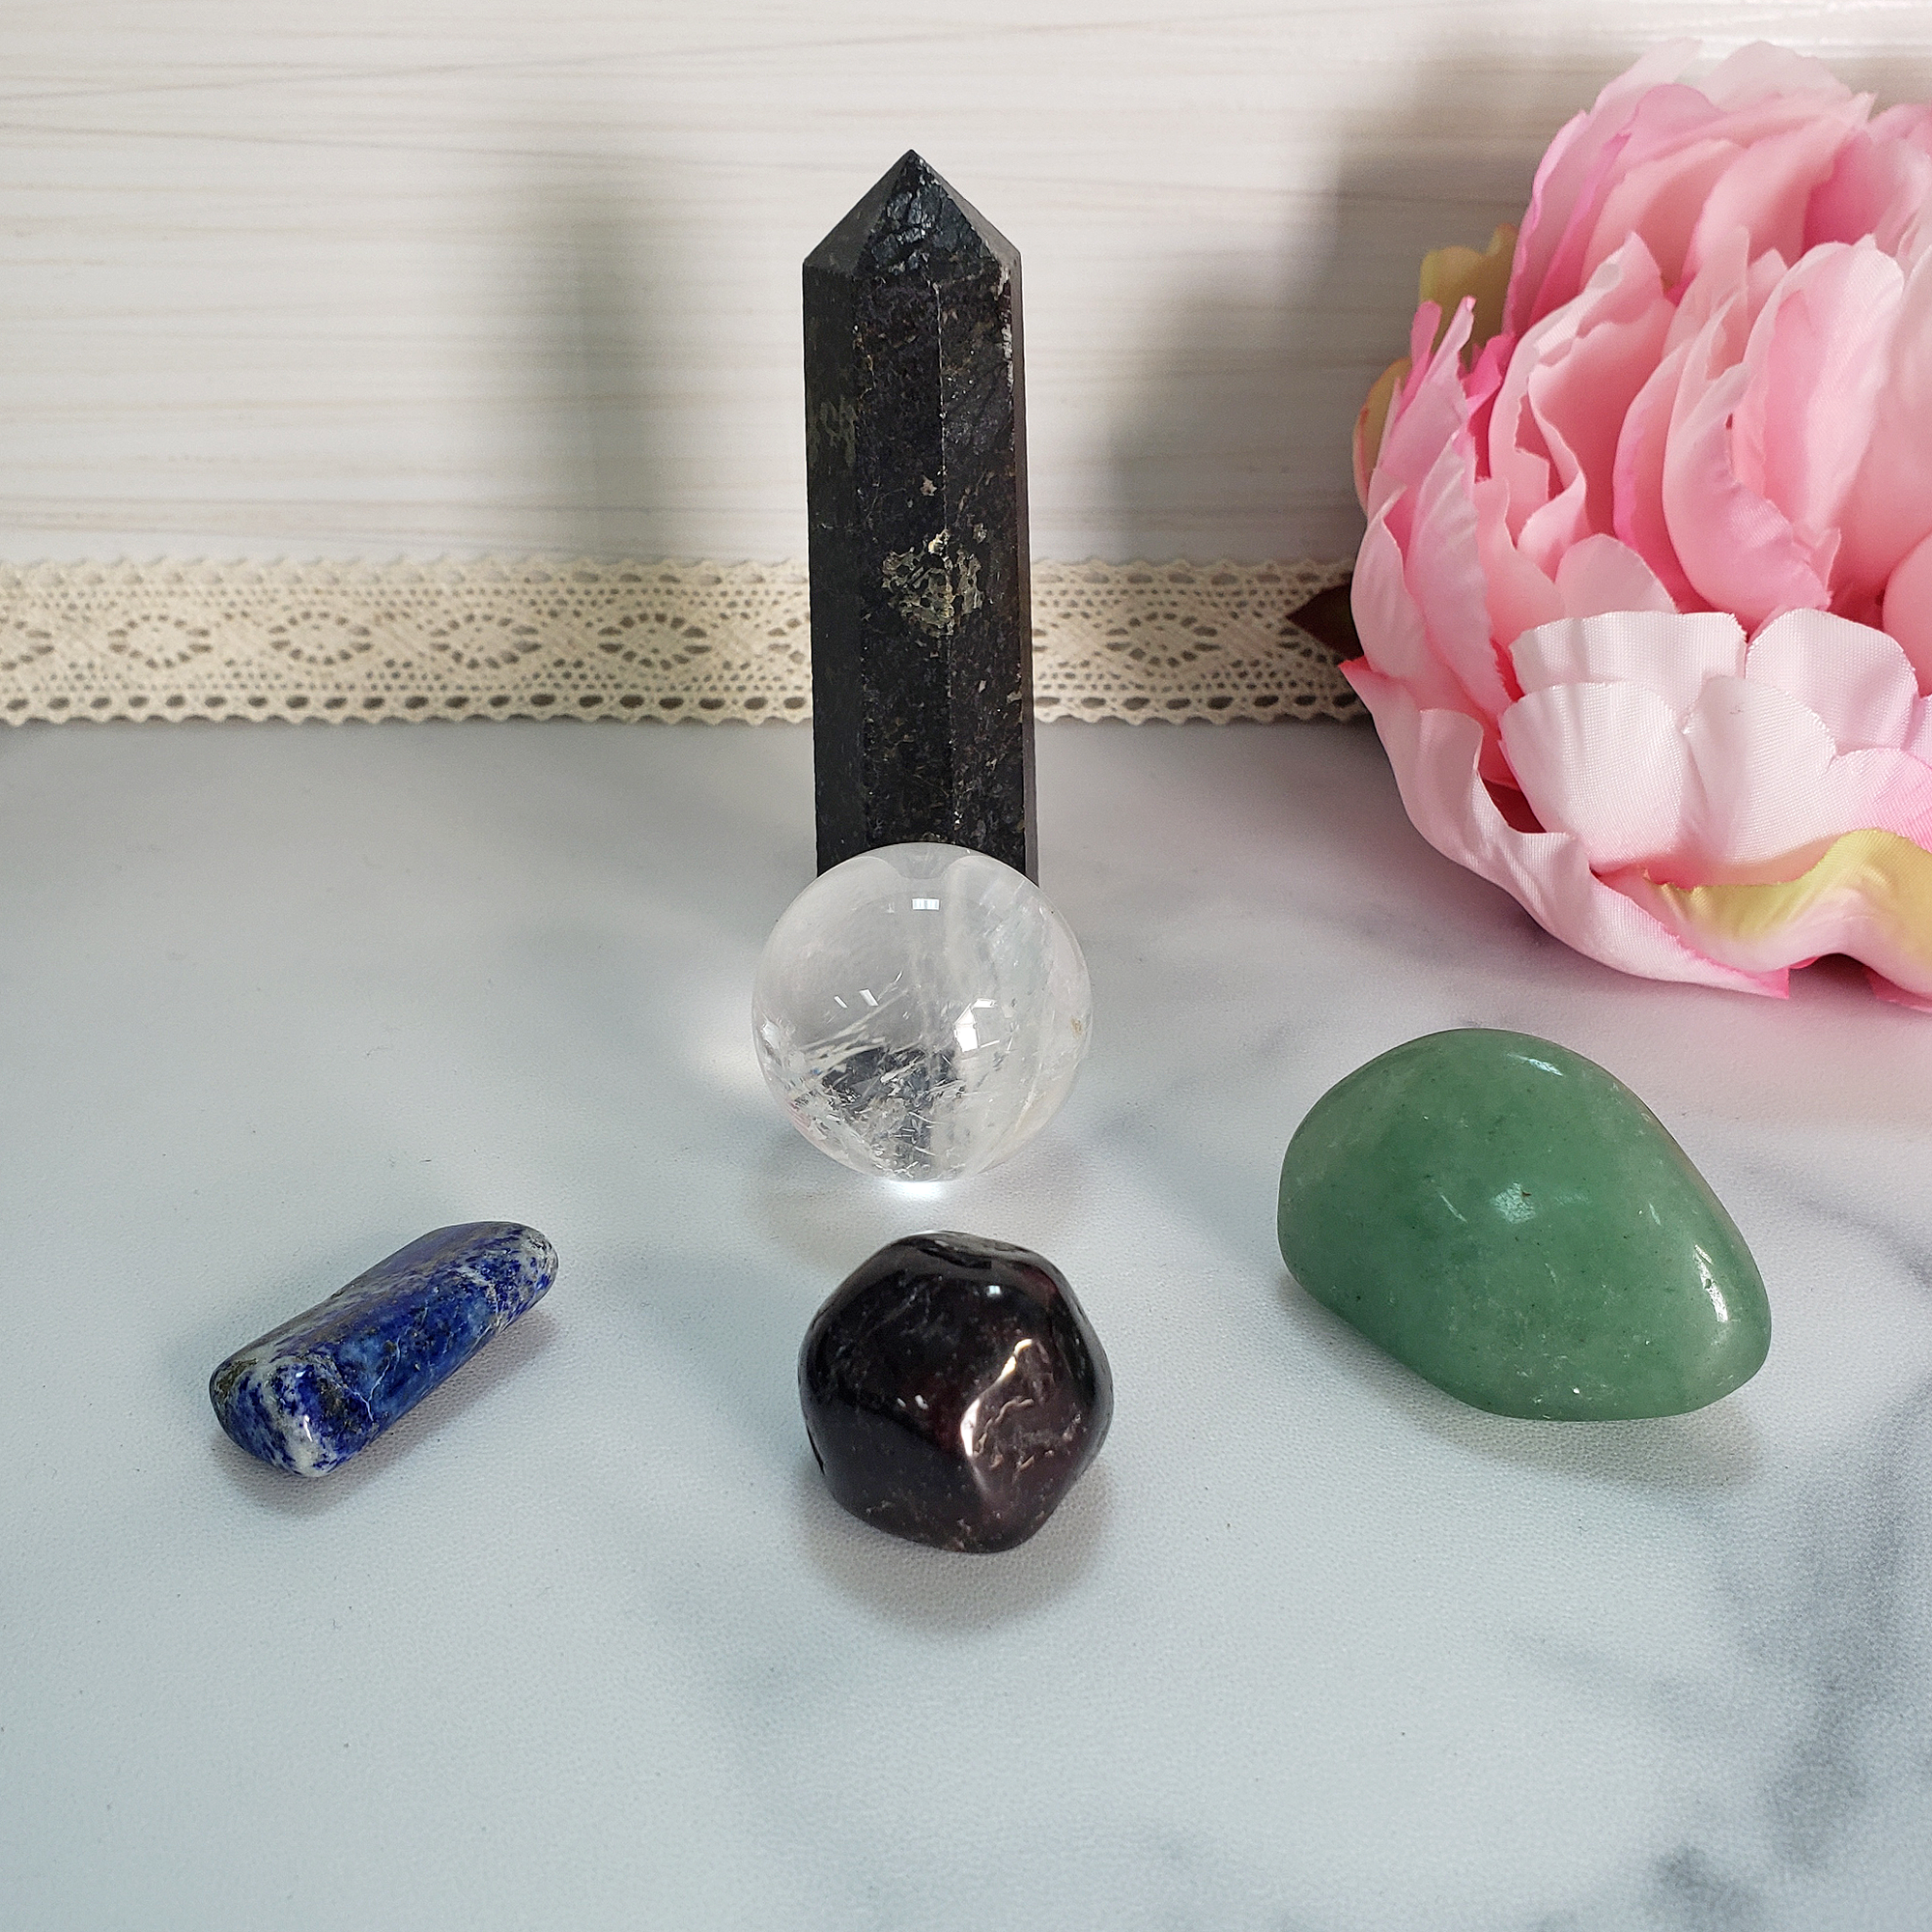 Graduation Gift Box - Crystals For Successful New Beginnings - Gems with Tower